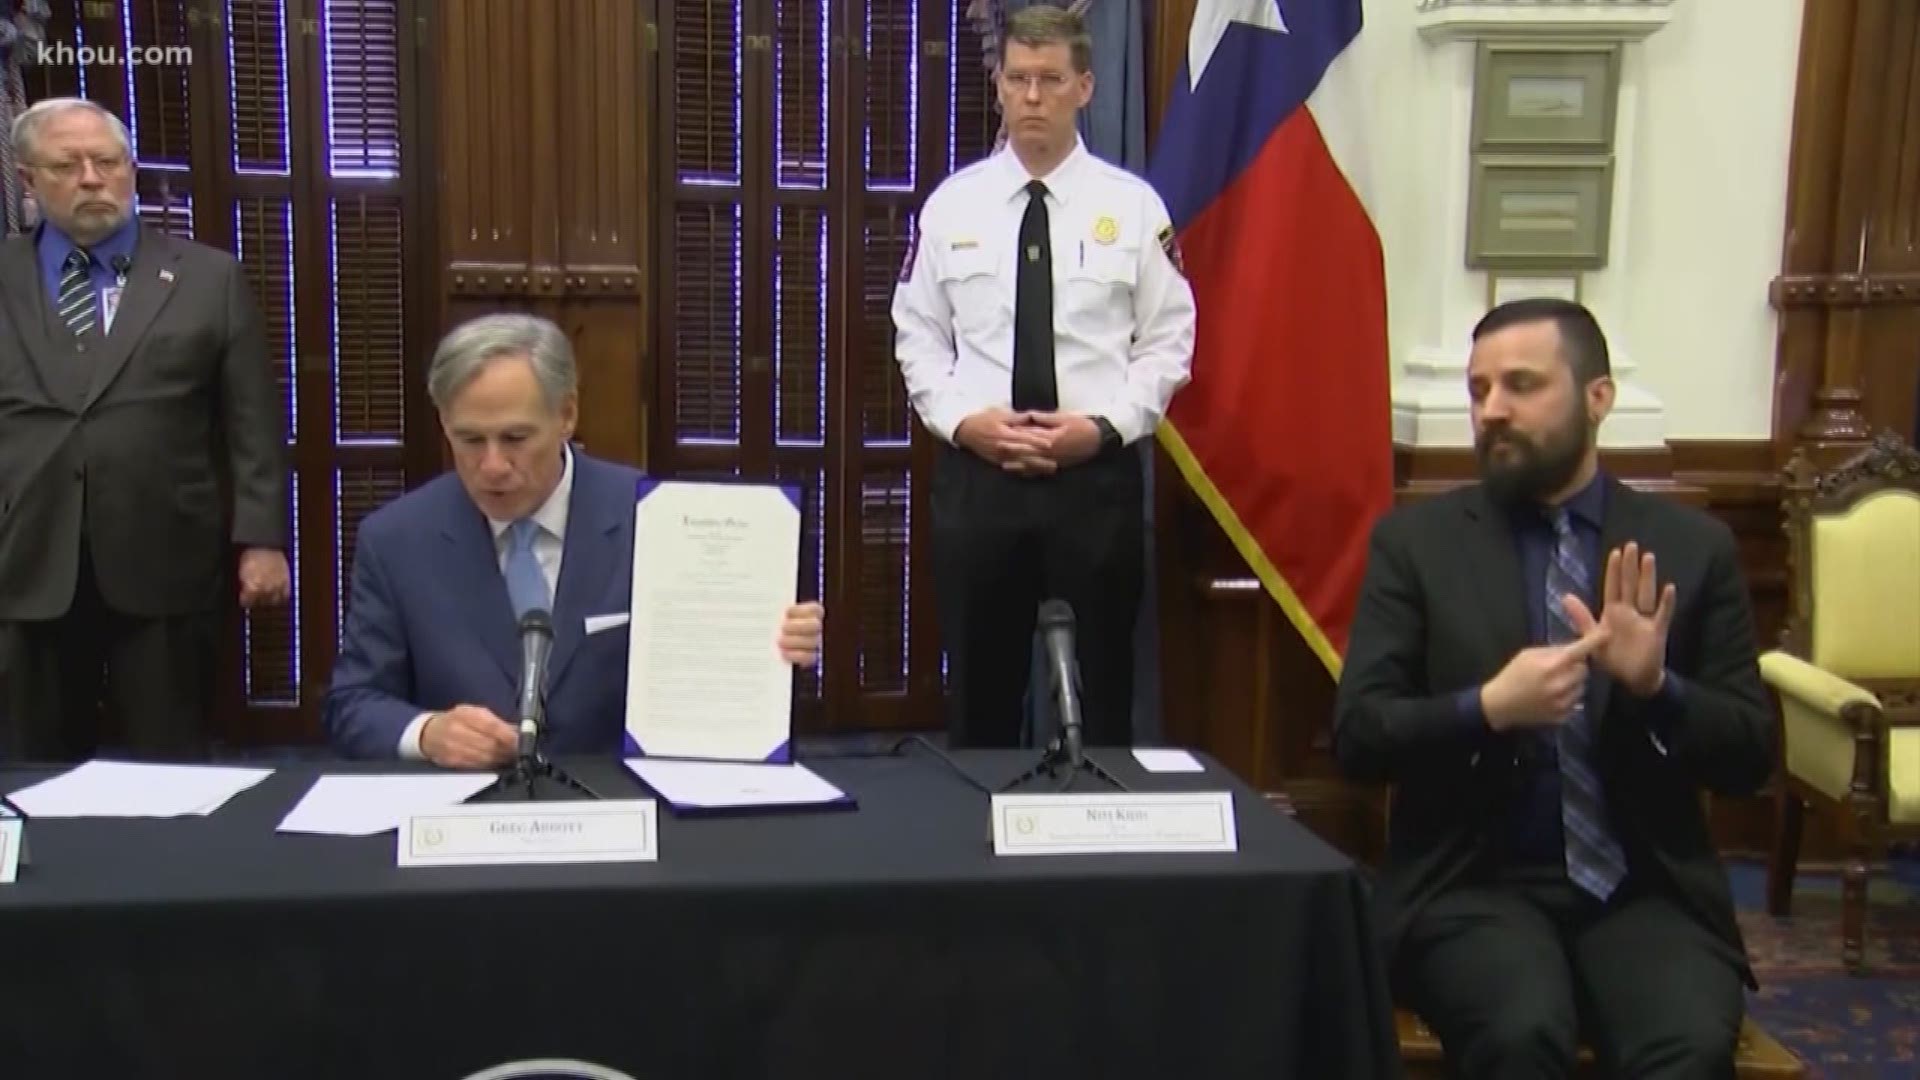 Gov. Greg Abbott said six people have died out of 334 positive COVID-19 cases in the state and as of March 22, 8,700 people have been tested.